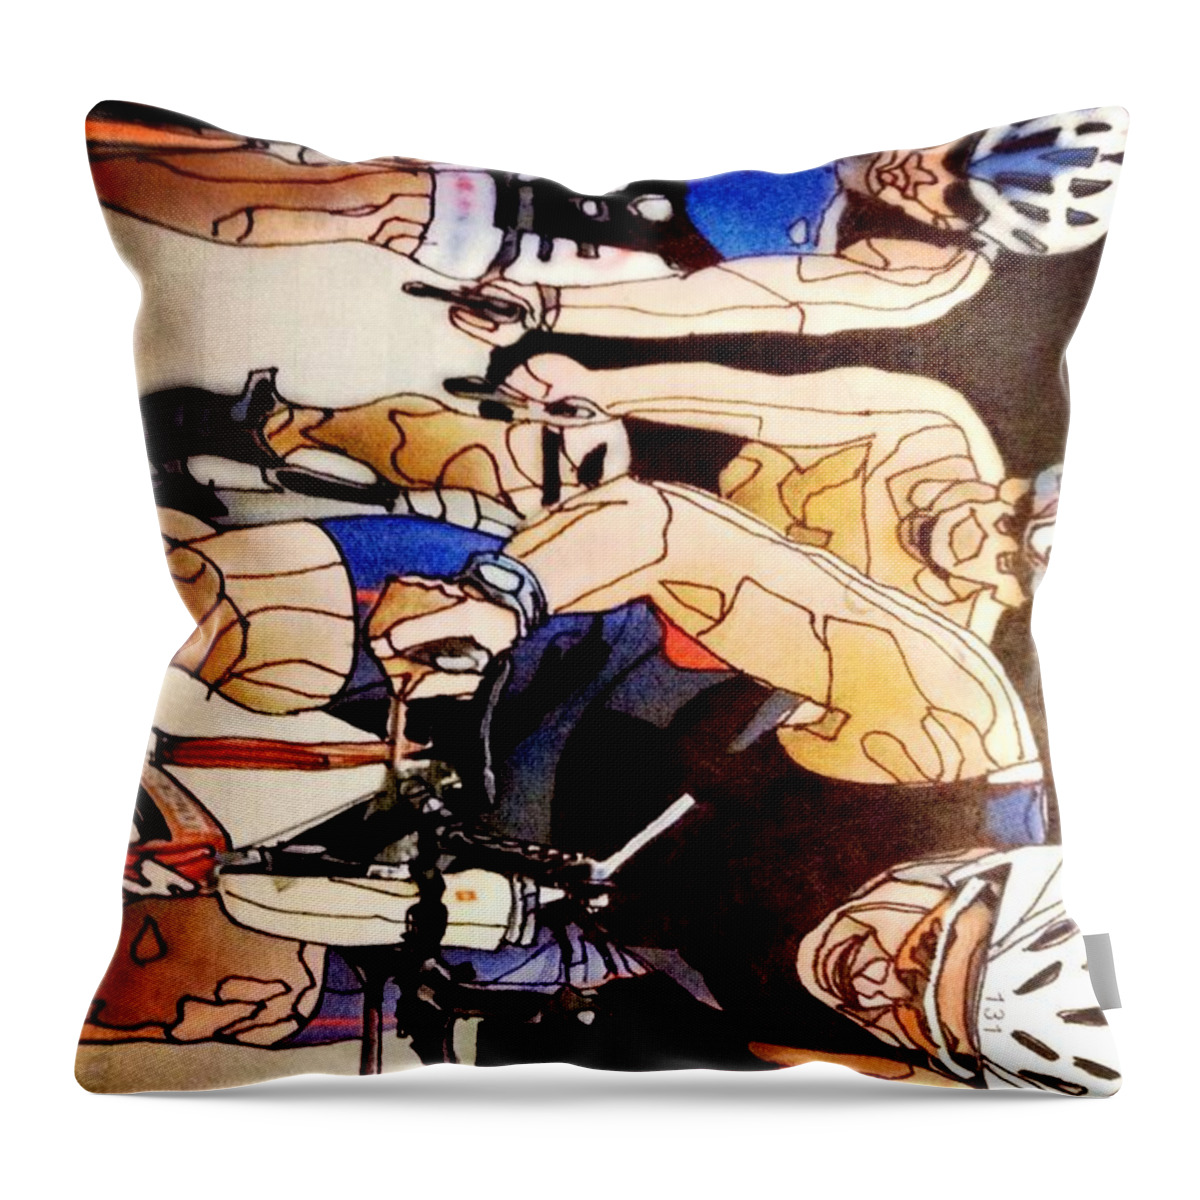 Bike Throw Pillow featuring the mixed media Bikers by Bryan Brouwer